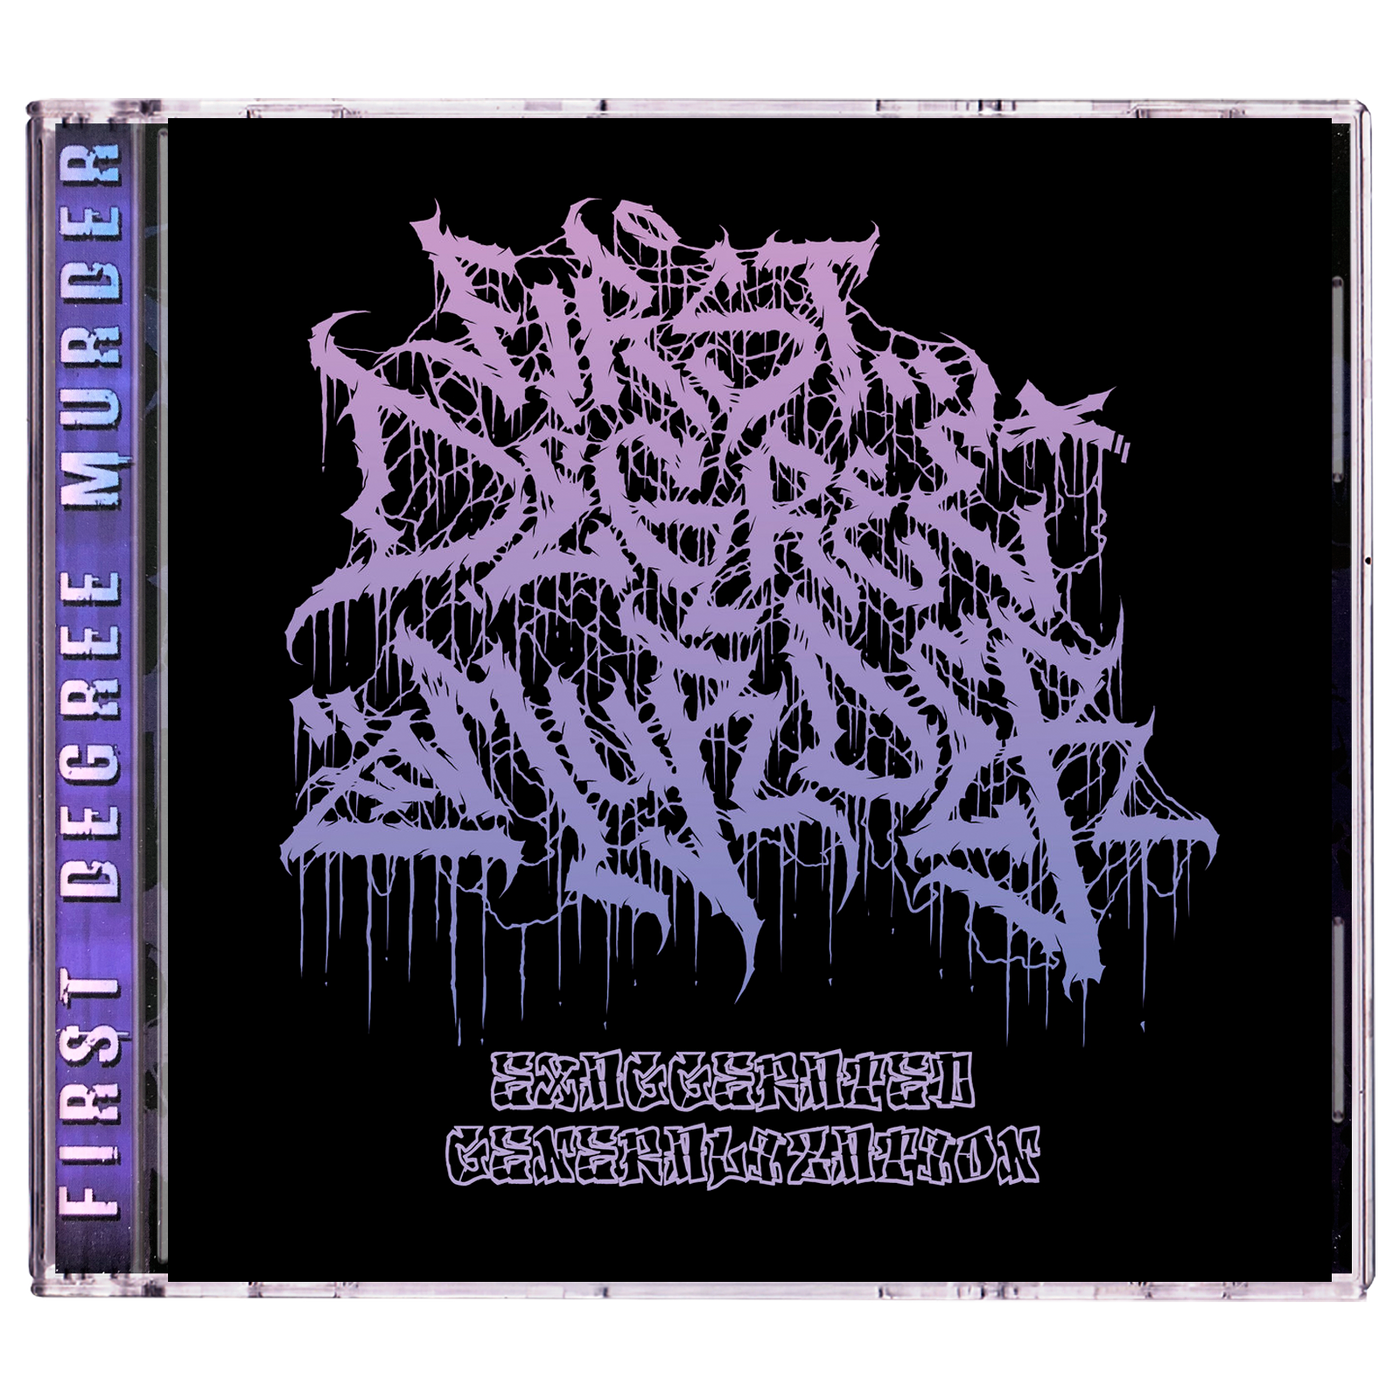 First Degree Murder 'Exaggerated Generalization' CD